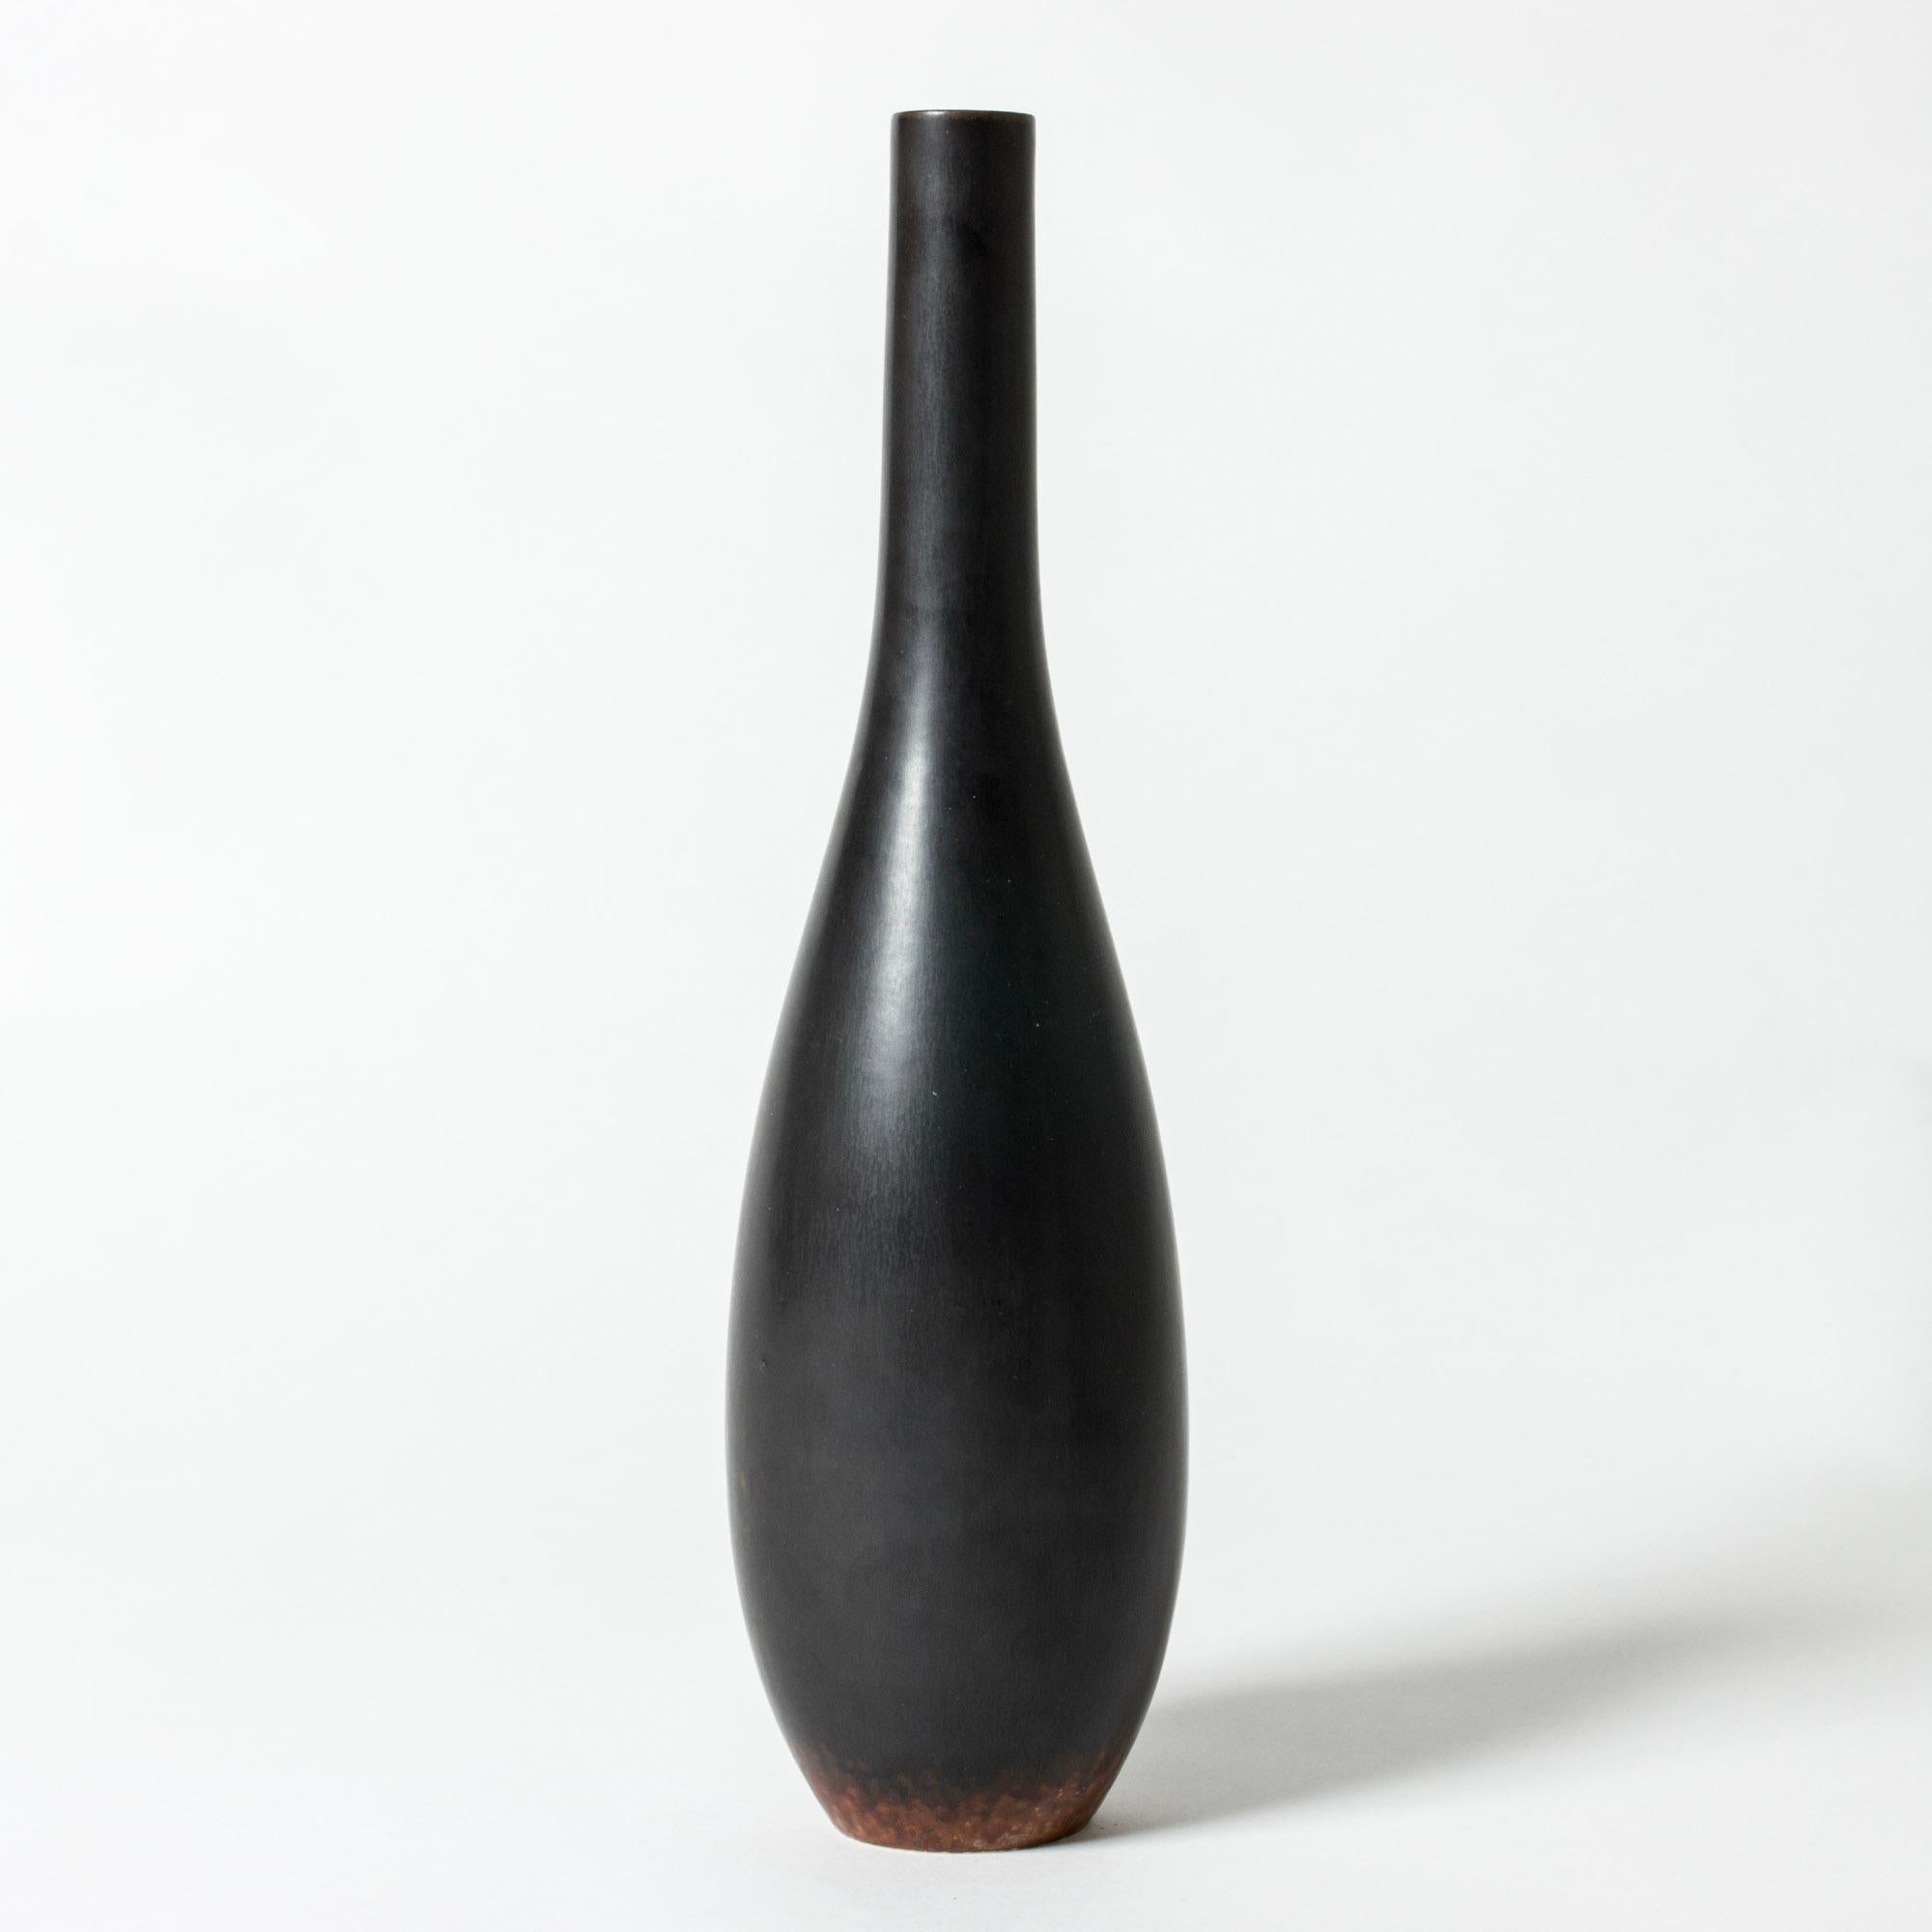 Striking stoneware vase by Carl-Harry Stålhane in a narrow, drop-shaped form. Jet black glaze with rusty color around the base.

Carl-Harry Stålhane was one of the stars among Swedish ceramic artists during the 1950s, 1960s and 1970s, whose